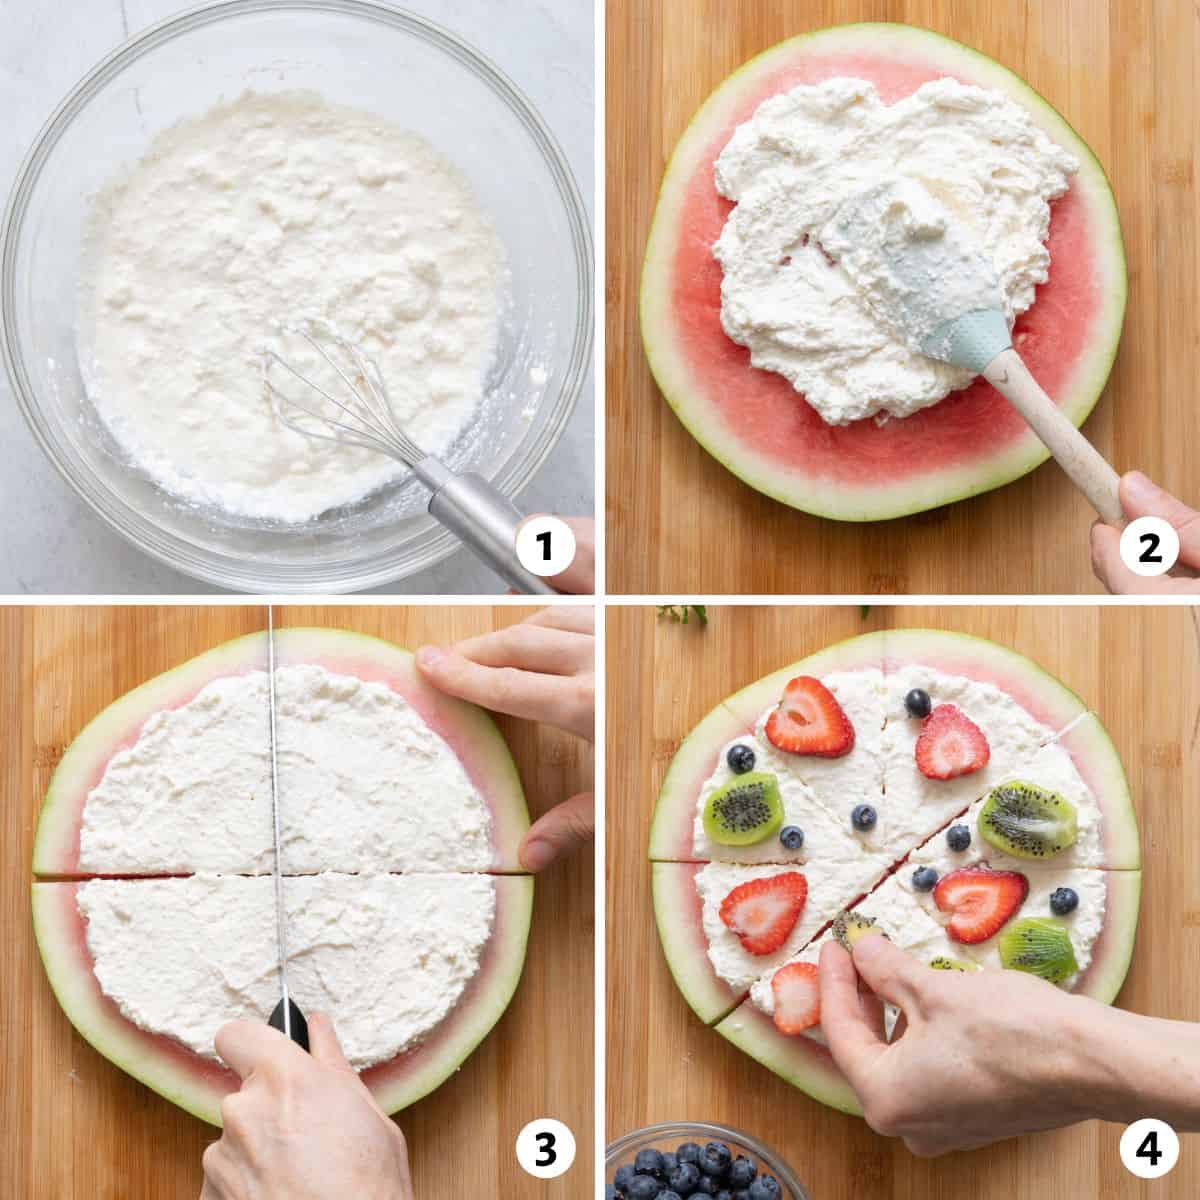 4 image collage making recipe by mixing ricotta mix in a bowl, spreading on a round slice of watermelon, cutting into slices, and then toping with strawberries, blueberries, and kiwi.